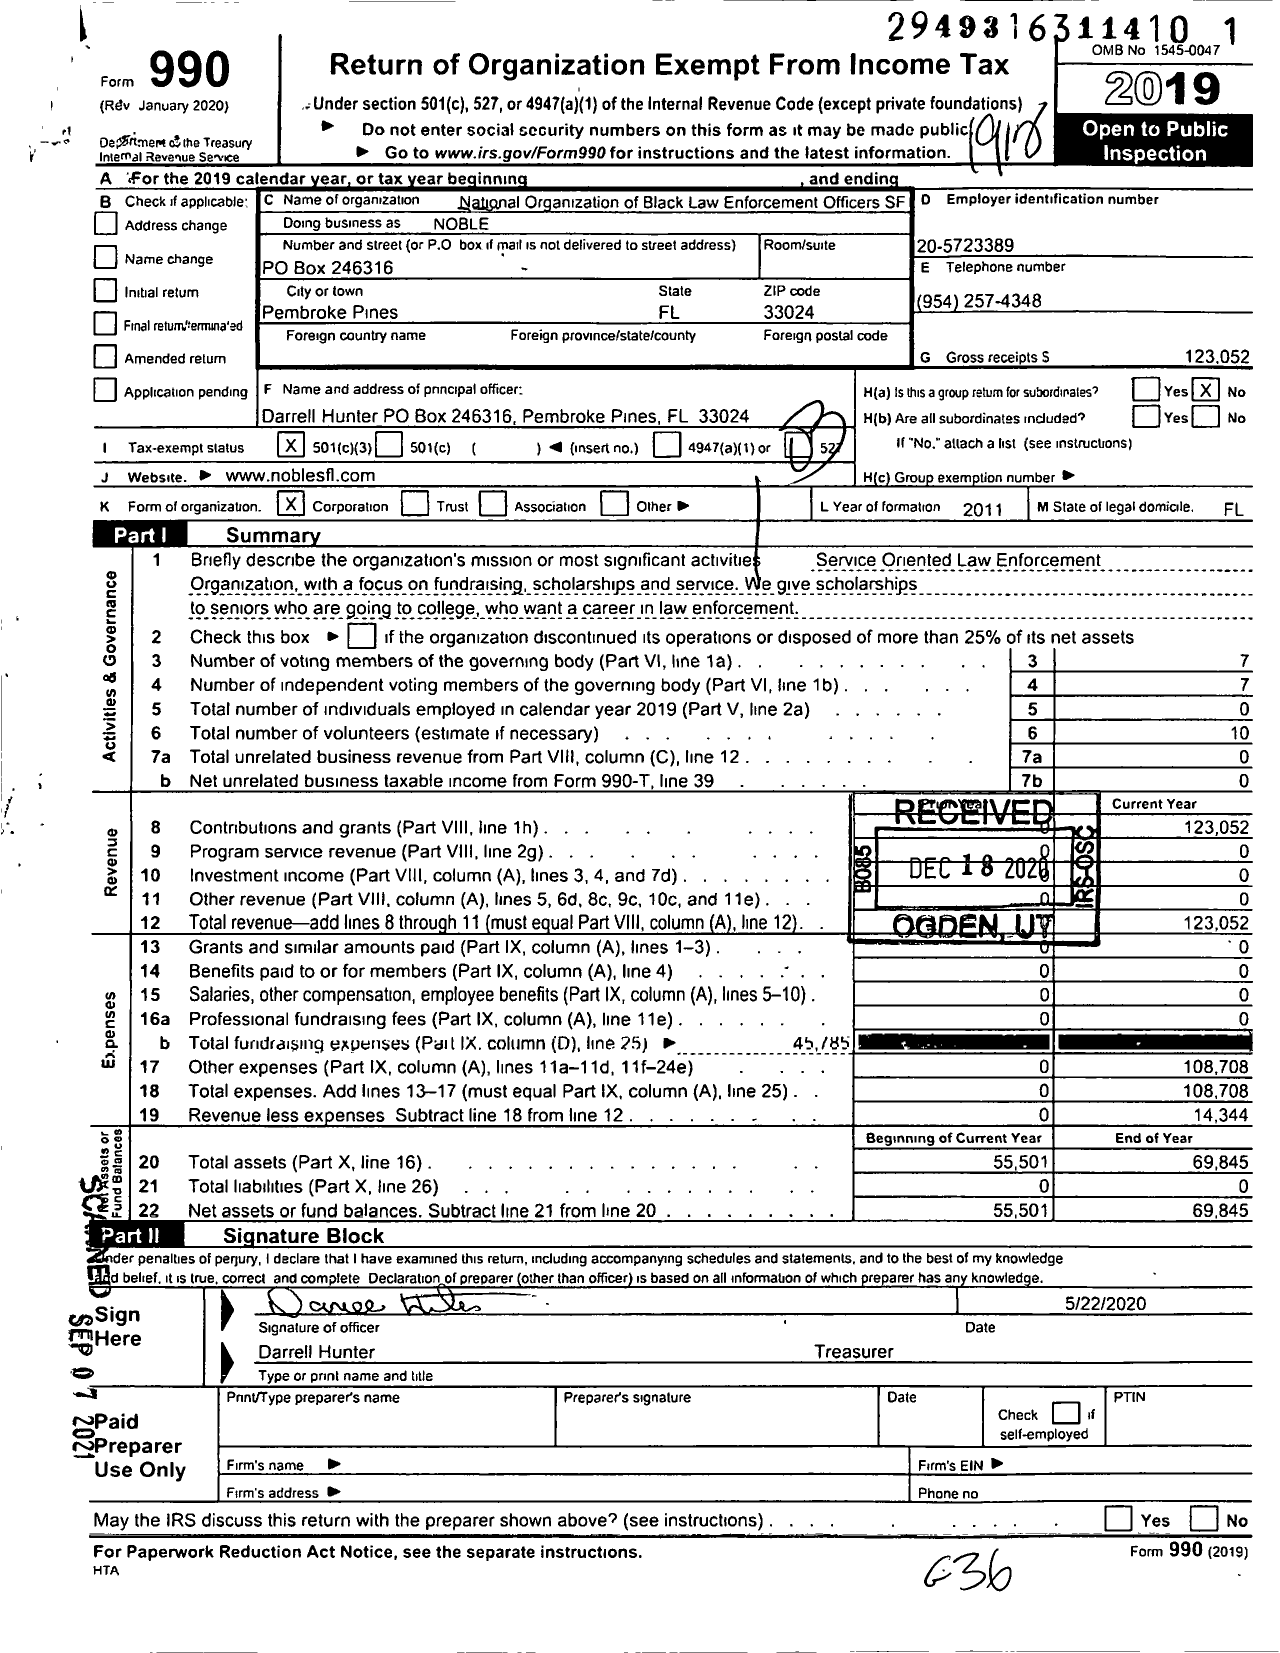 Image of first page of 2019 Form 990 for National Organization of Black Law Enforcement Executives / South Florida Chapter (NOBLE)